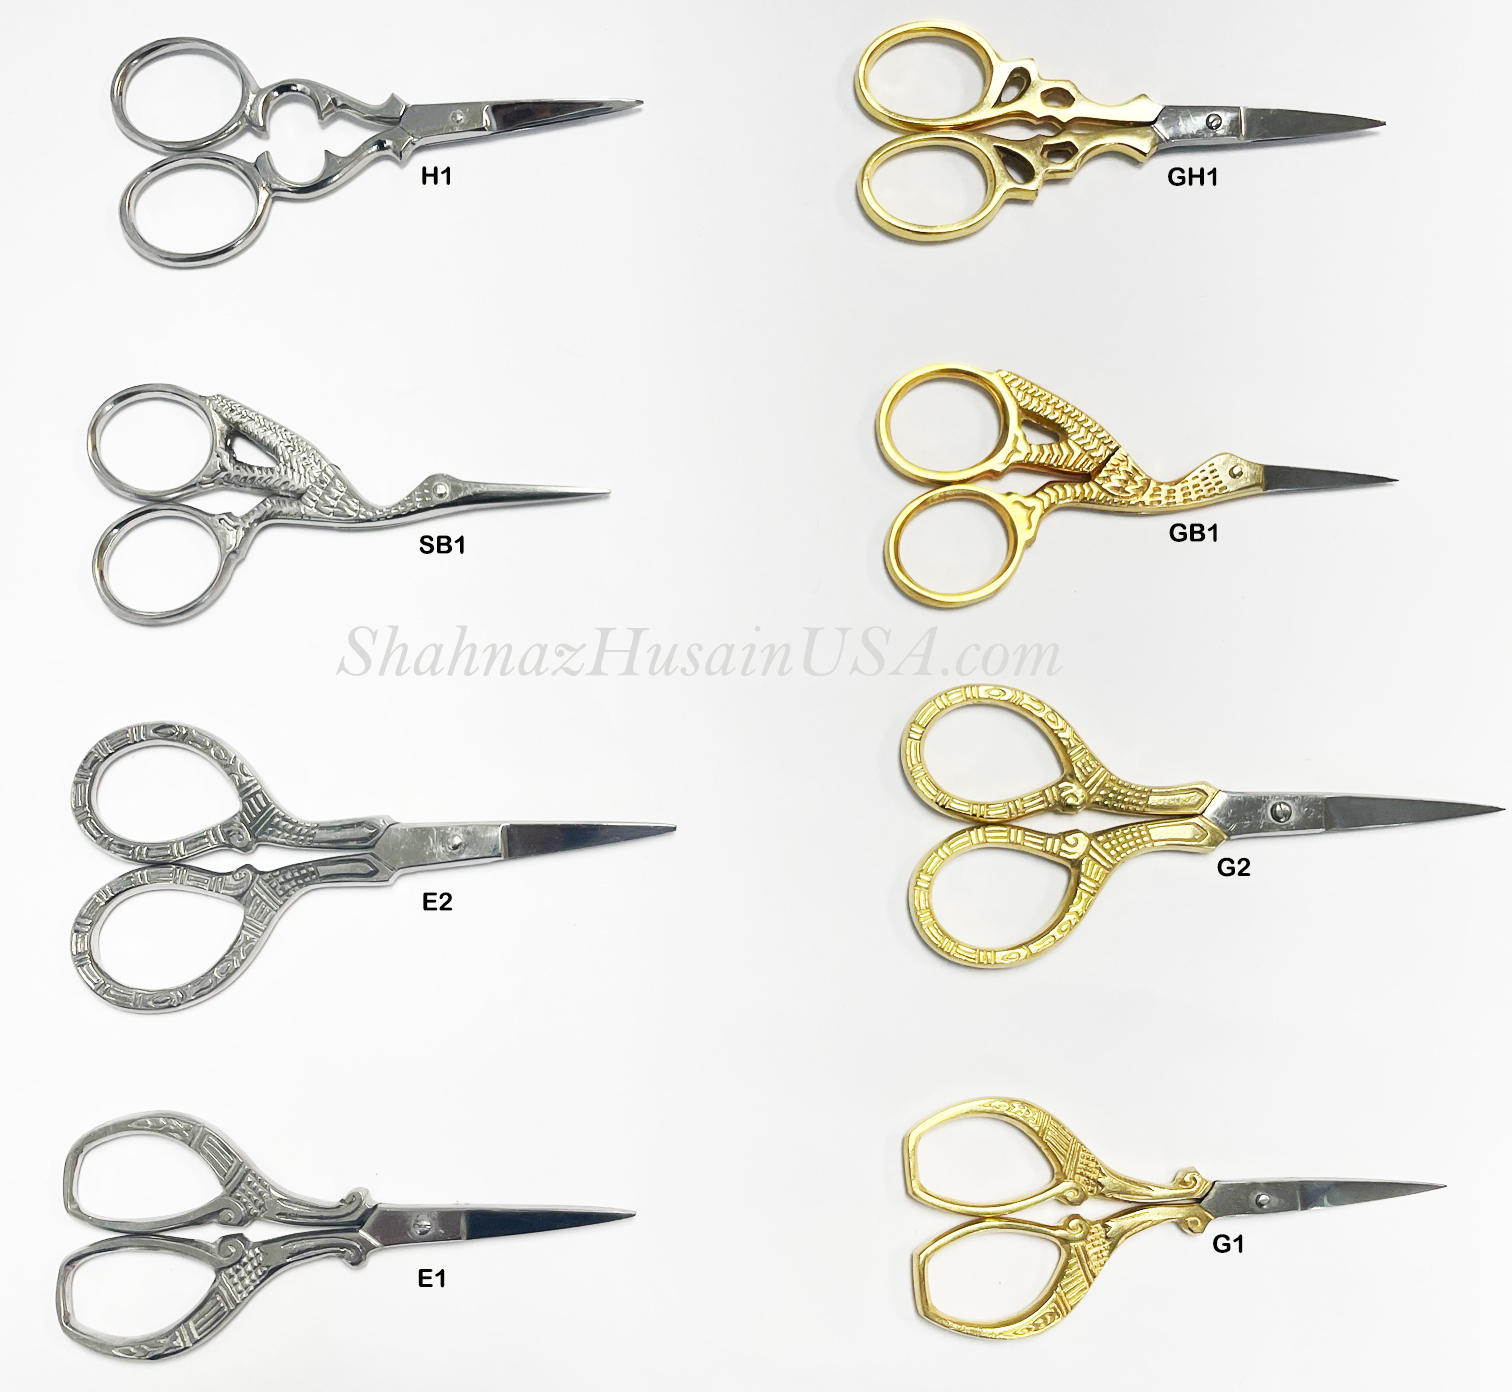 Eyebrow Shaping Mustache trimming embroidery small shears scissor